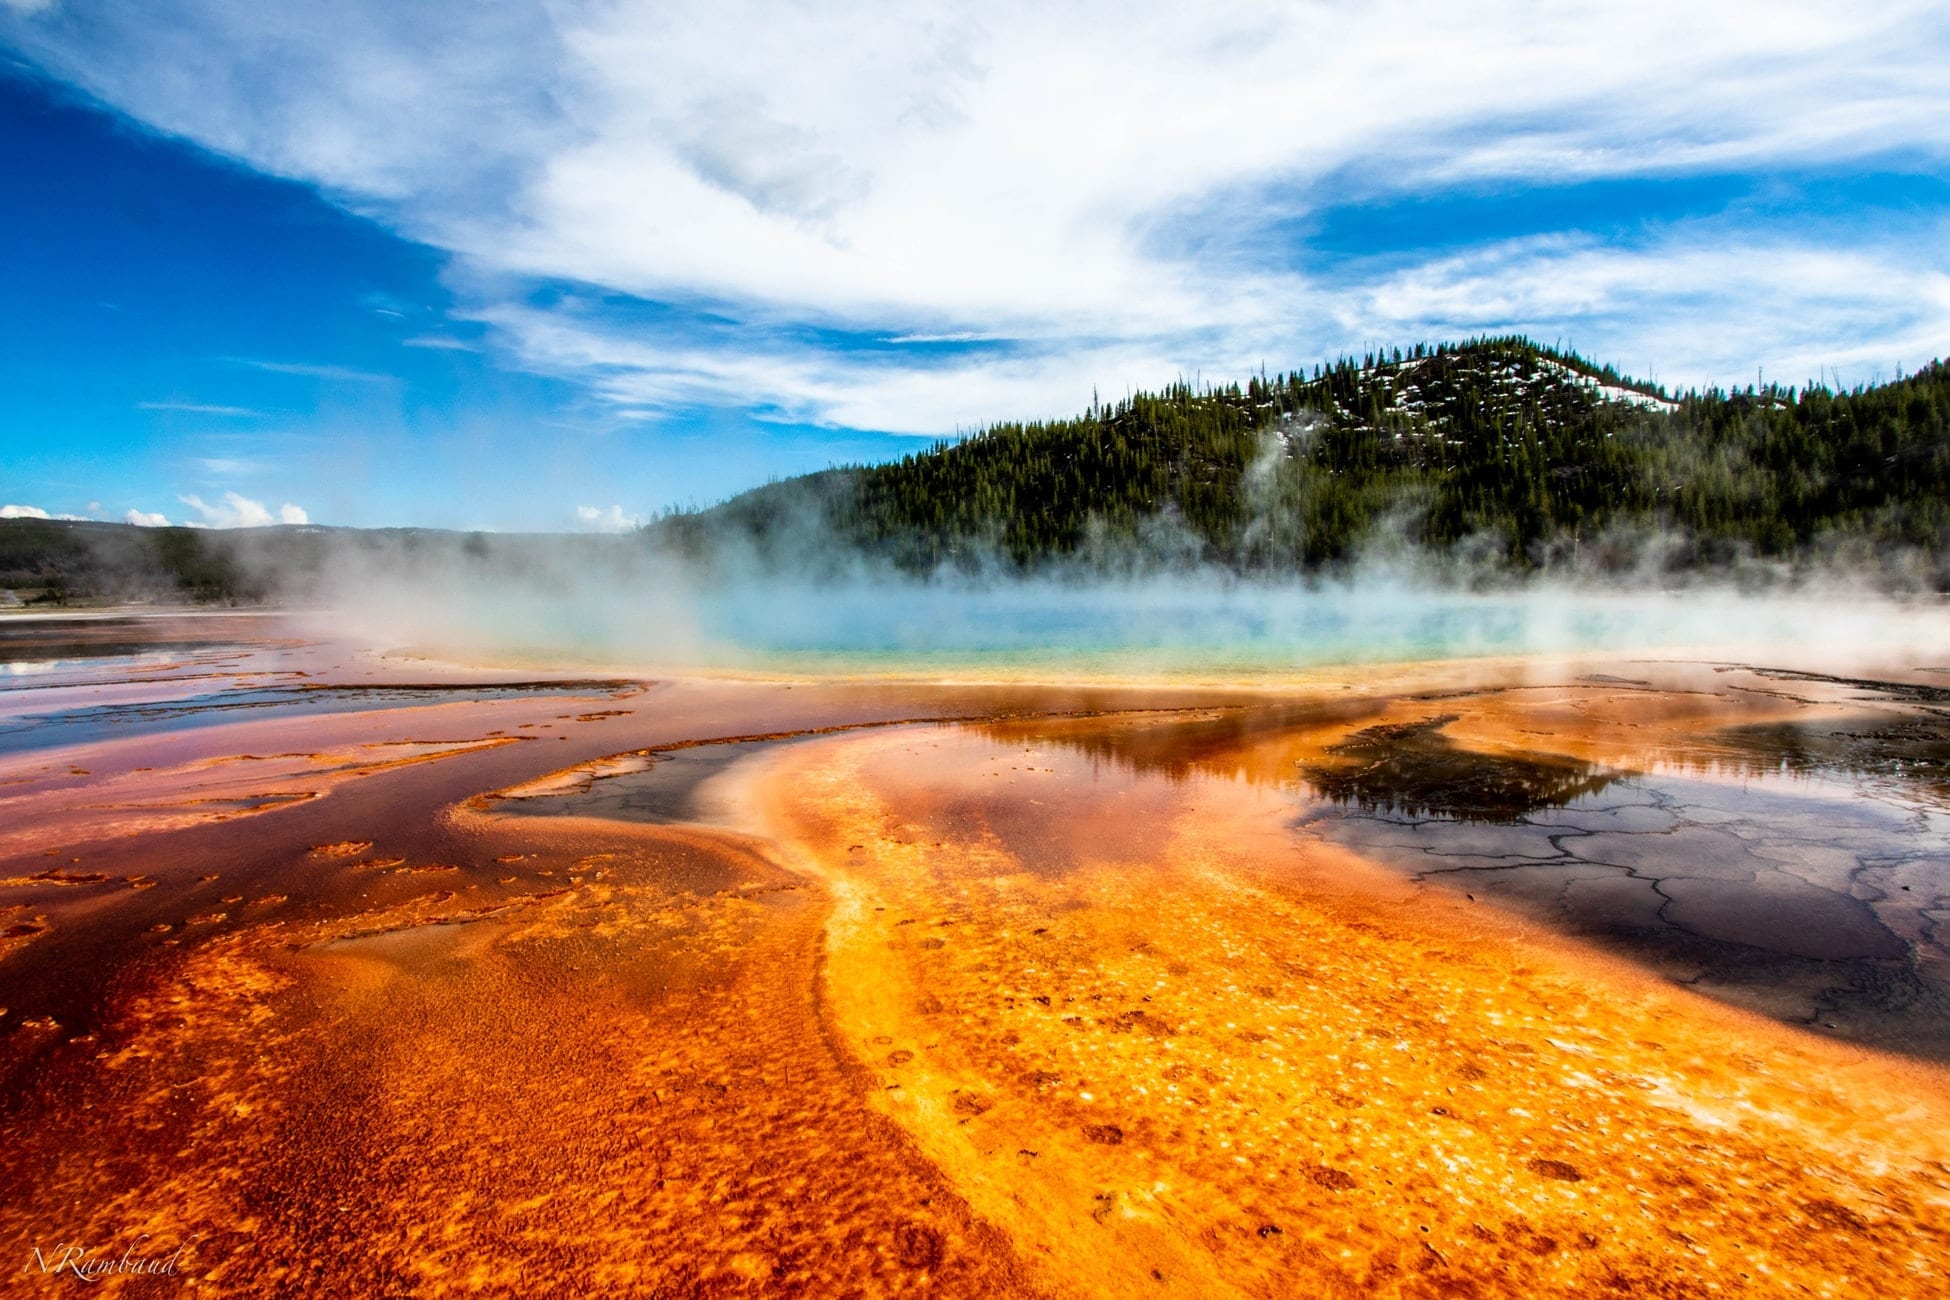 Facts about the Yellowstone National Park